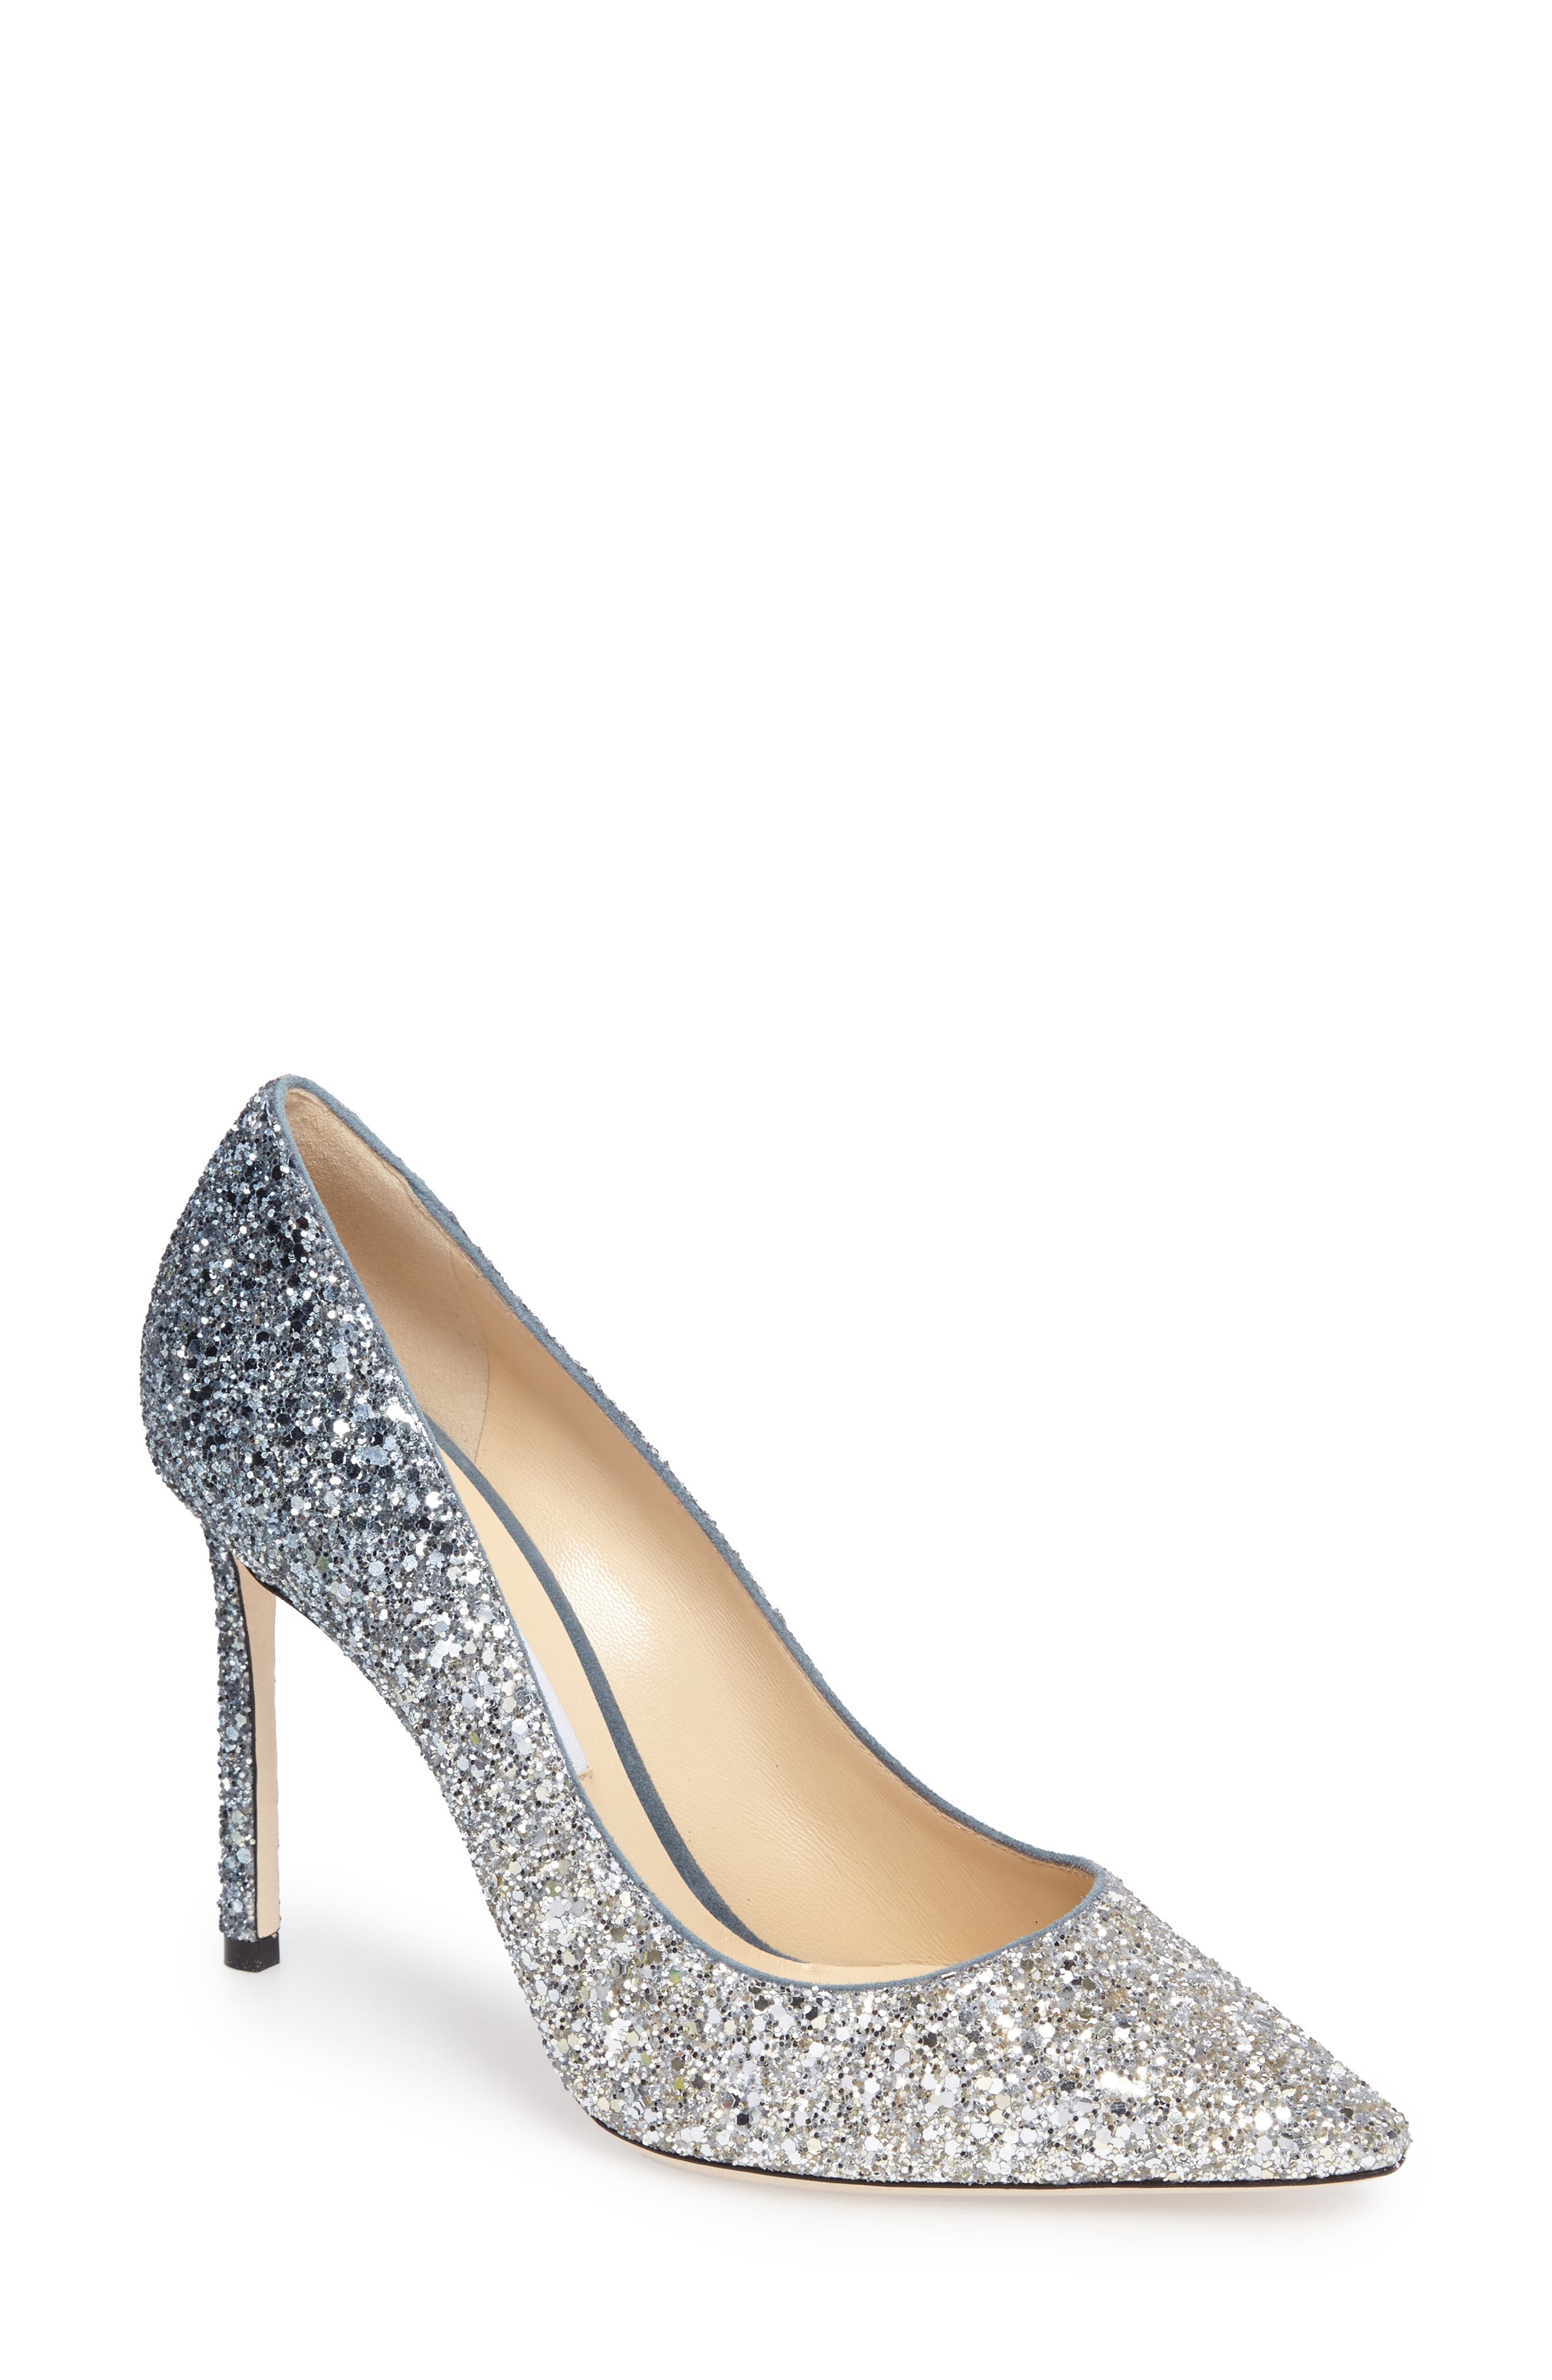 sparkly jimmy choos